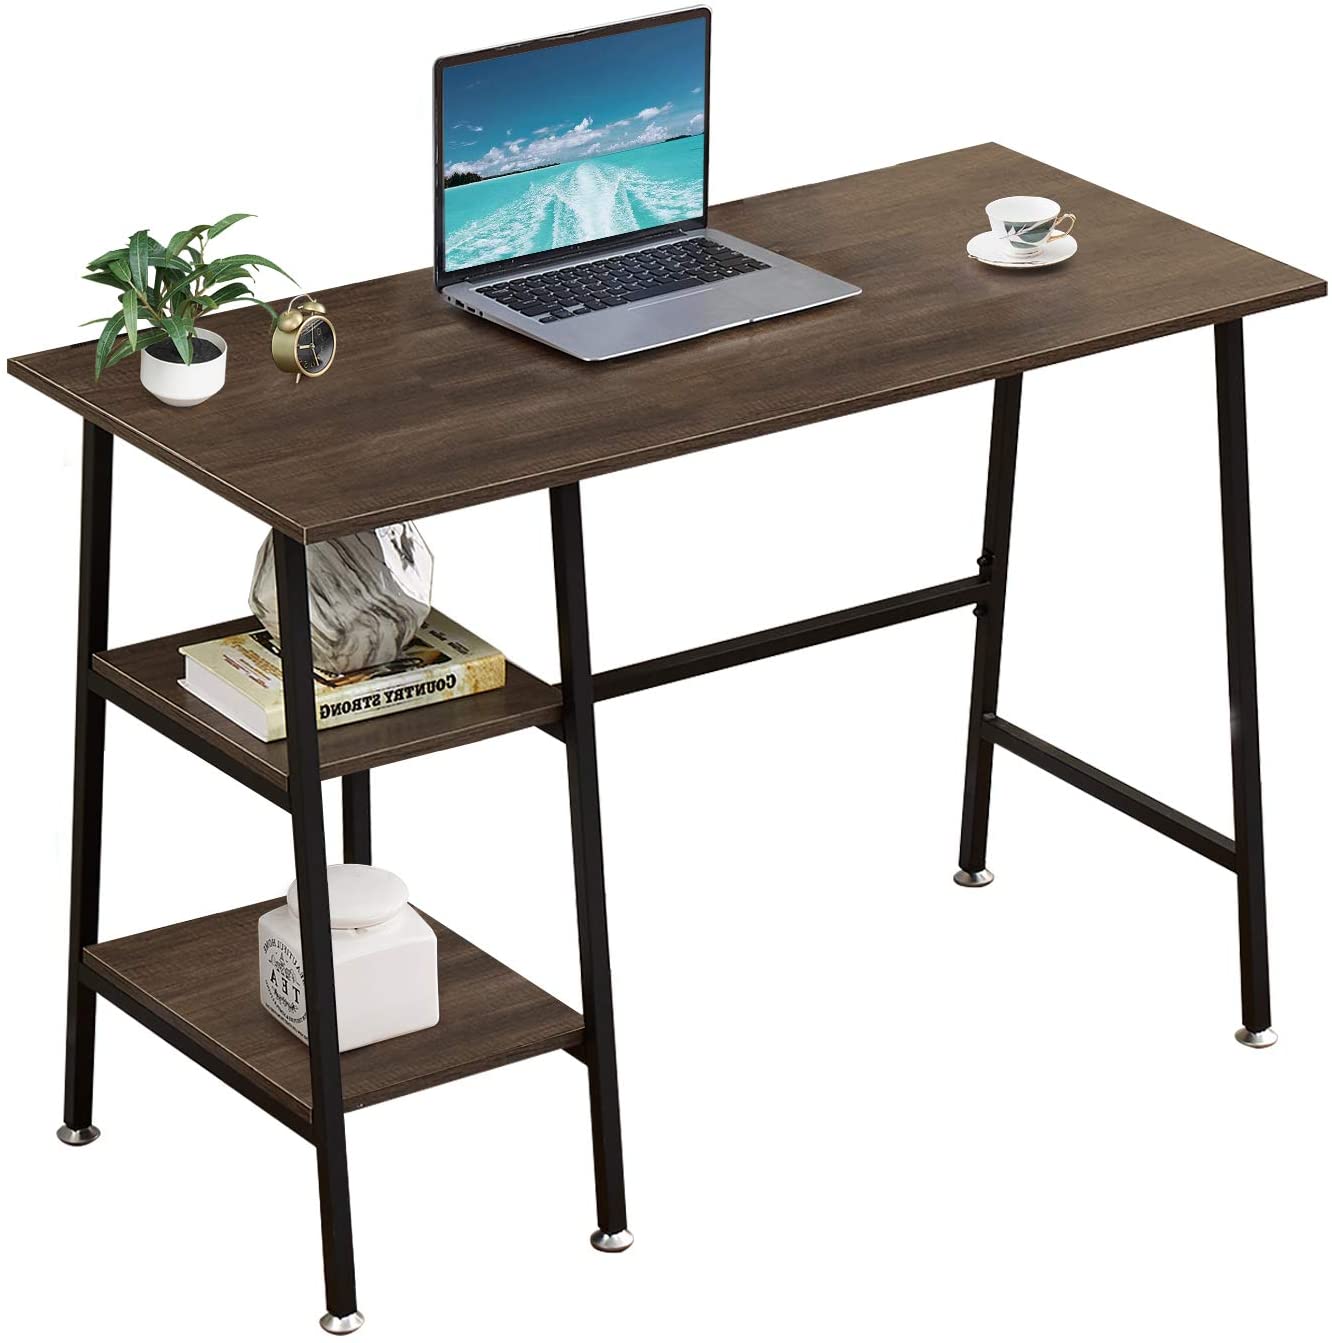 Computer Storage Workstation Study Desk Writing Table with 2 Tier Shelves  for Office and Home